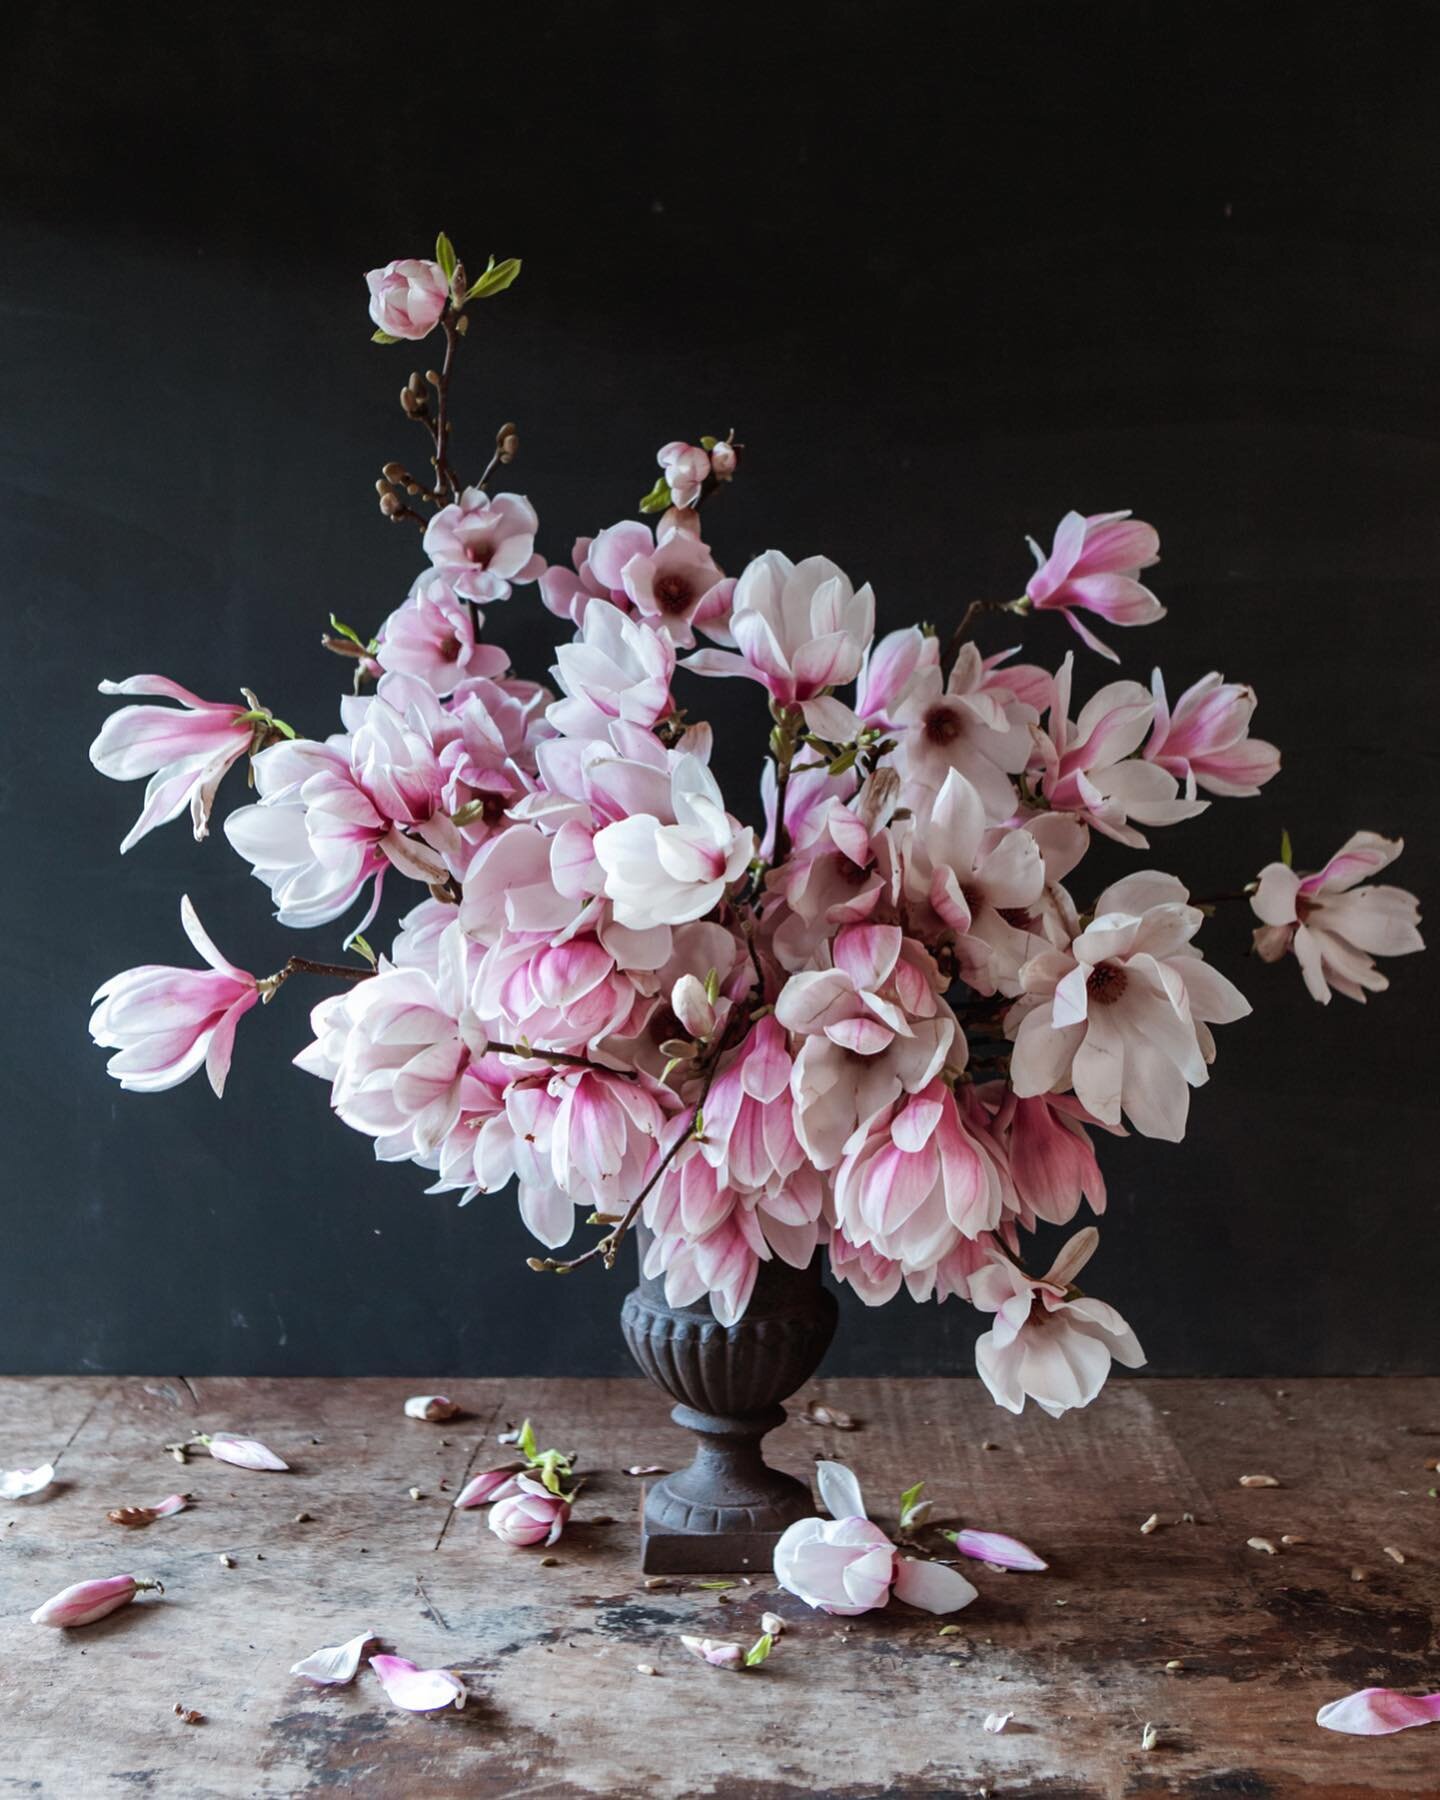 Wait.. since magnolias are edible, does this count as a salad? 🤔

If you want to learn how to create your own flower salad in a vase (lol).. sign up for my membership! This magnolia urn design class is coming soon - as well as a magnolia editorial b